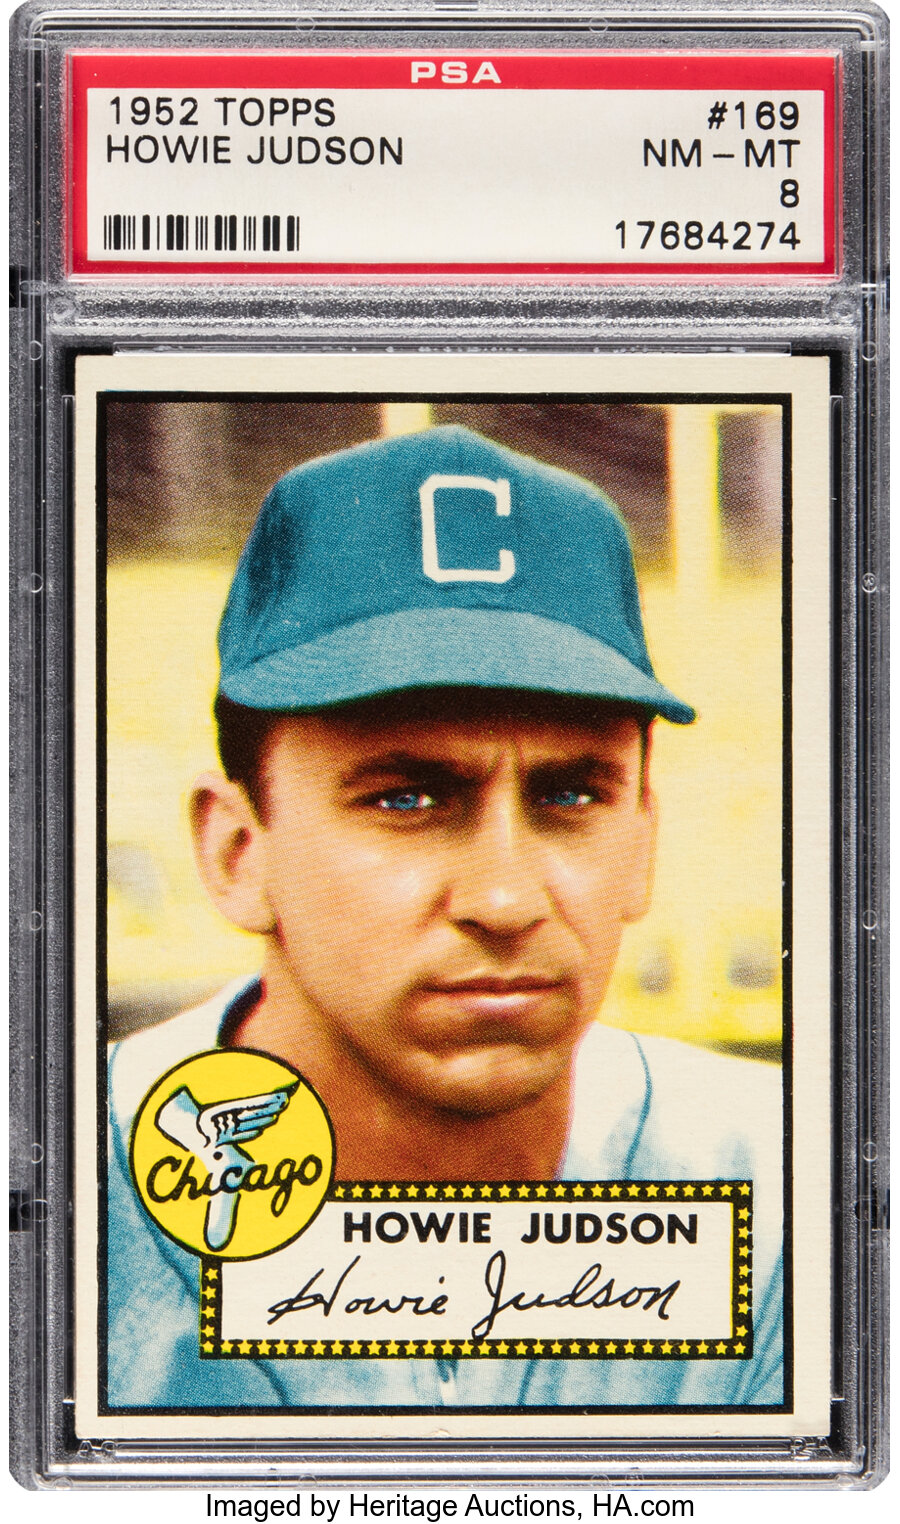 1952 Topps Howie Judson #169 PSA NM-MT 8 - Three Higher!